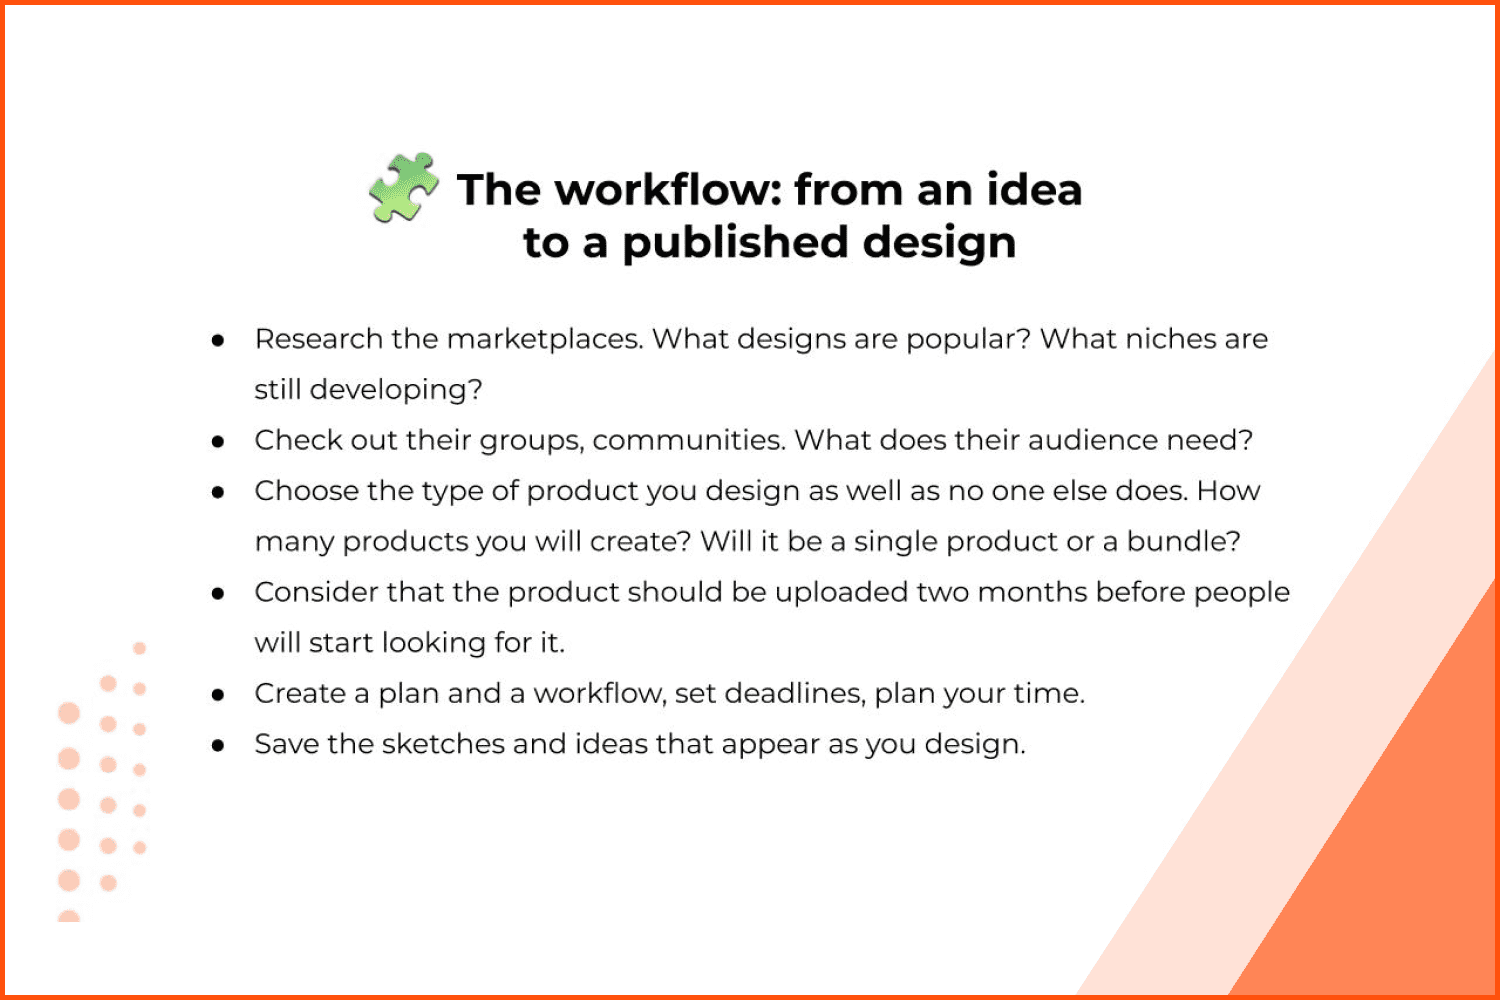 The workflow covered: from an idea to a published design.